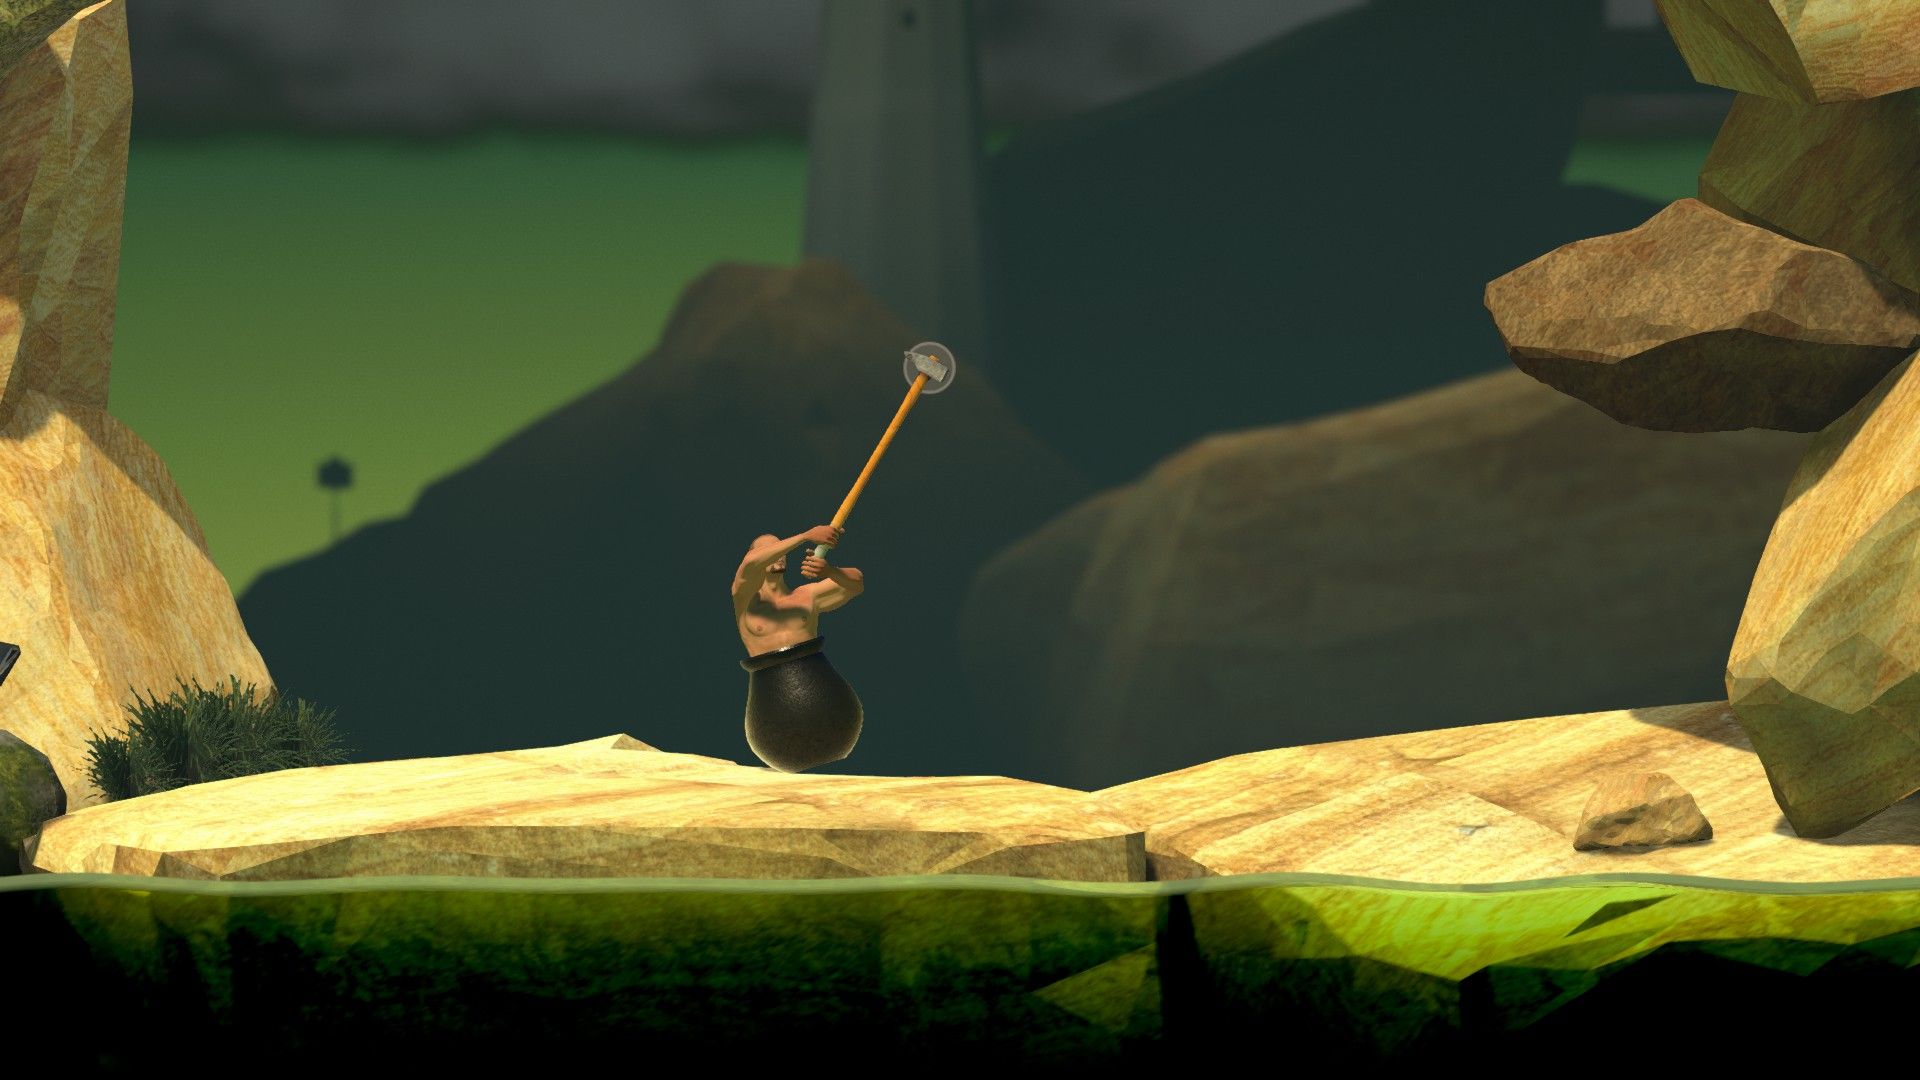 Getting Over It with Bennett Foddy piracy reddit